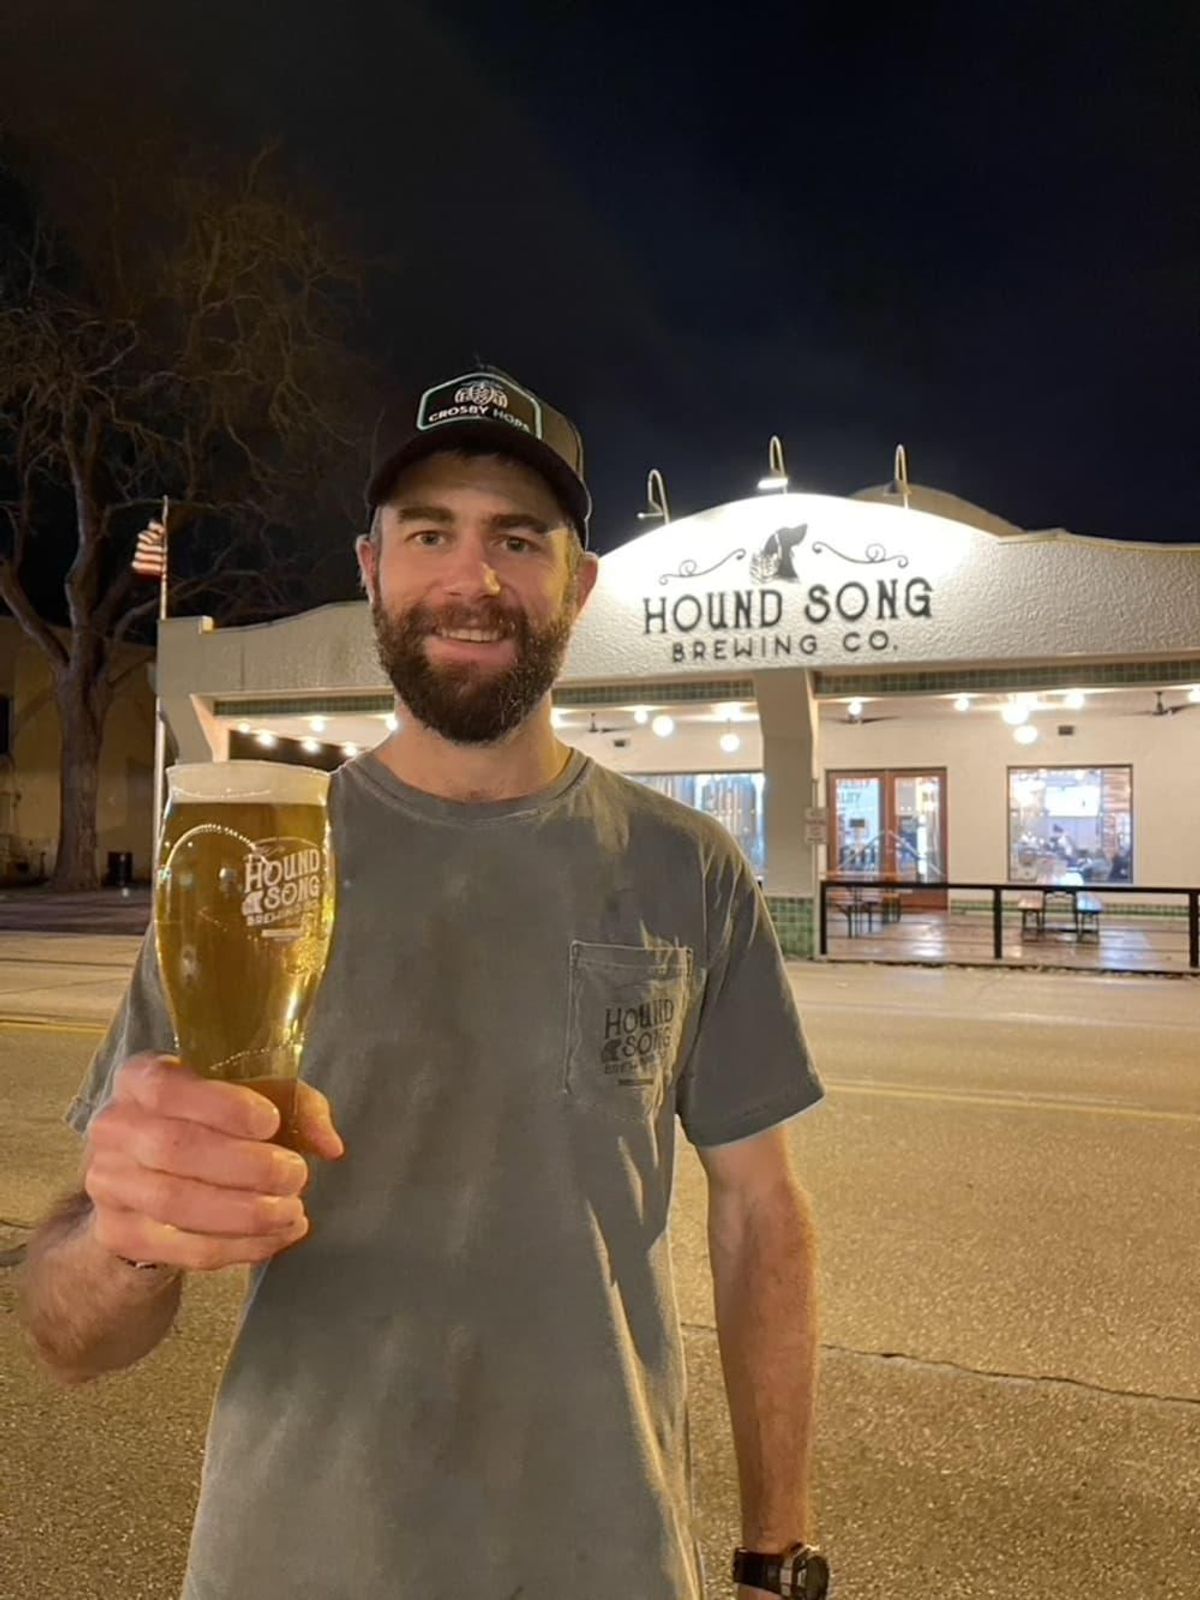 https://houston.culturemap.com/media-library/hound-song-brewing.jpg?id=31477424&width=1200&height=600